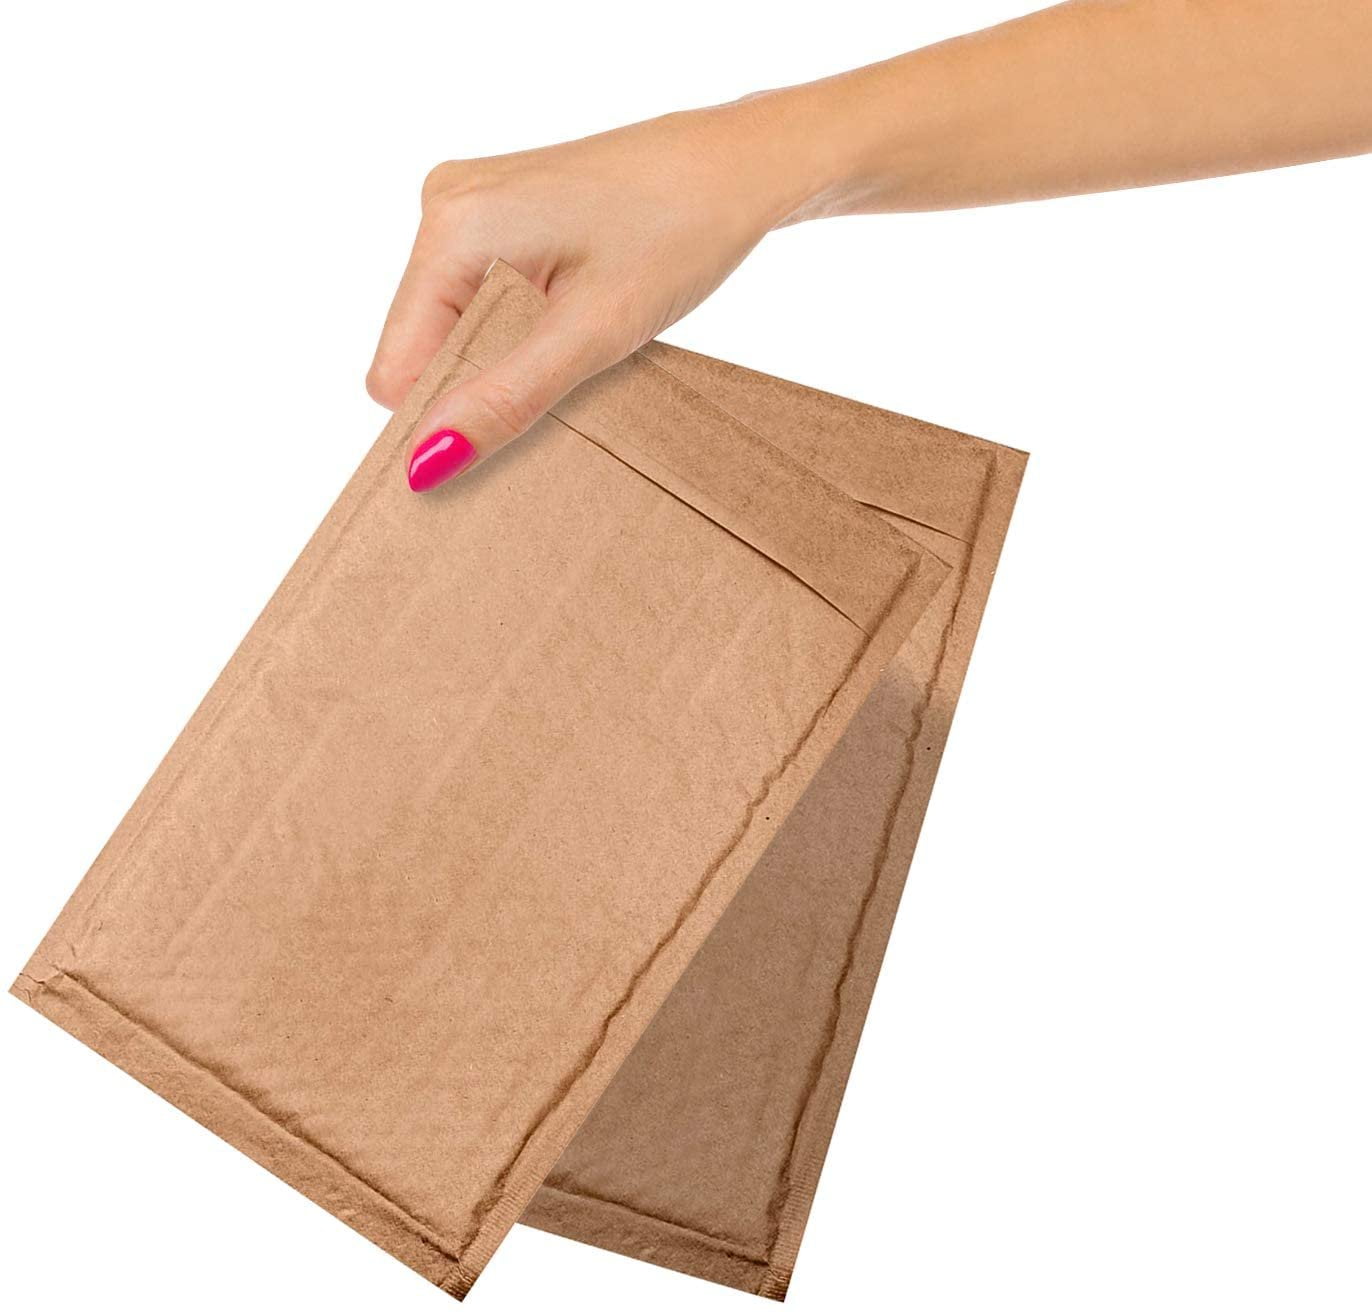 Channel Print 10PCS Kraft Bubble Mailers 4x7 Shipping Padded Envelopes Self Seal Cushioned Mailer Natural for Mailing/Shipping/Packaging 